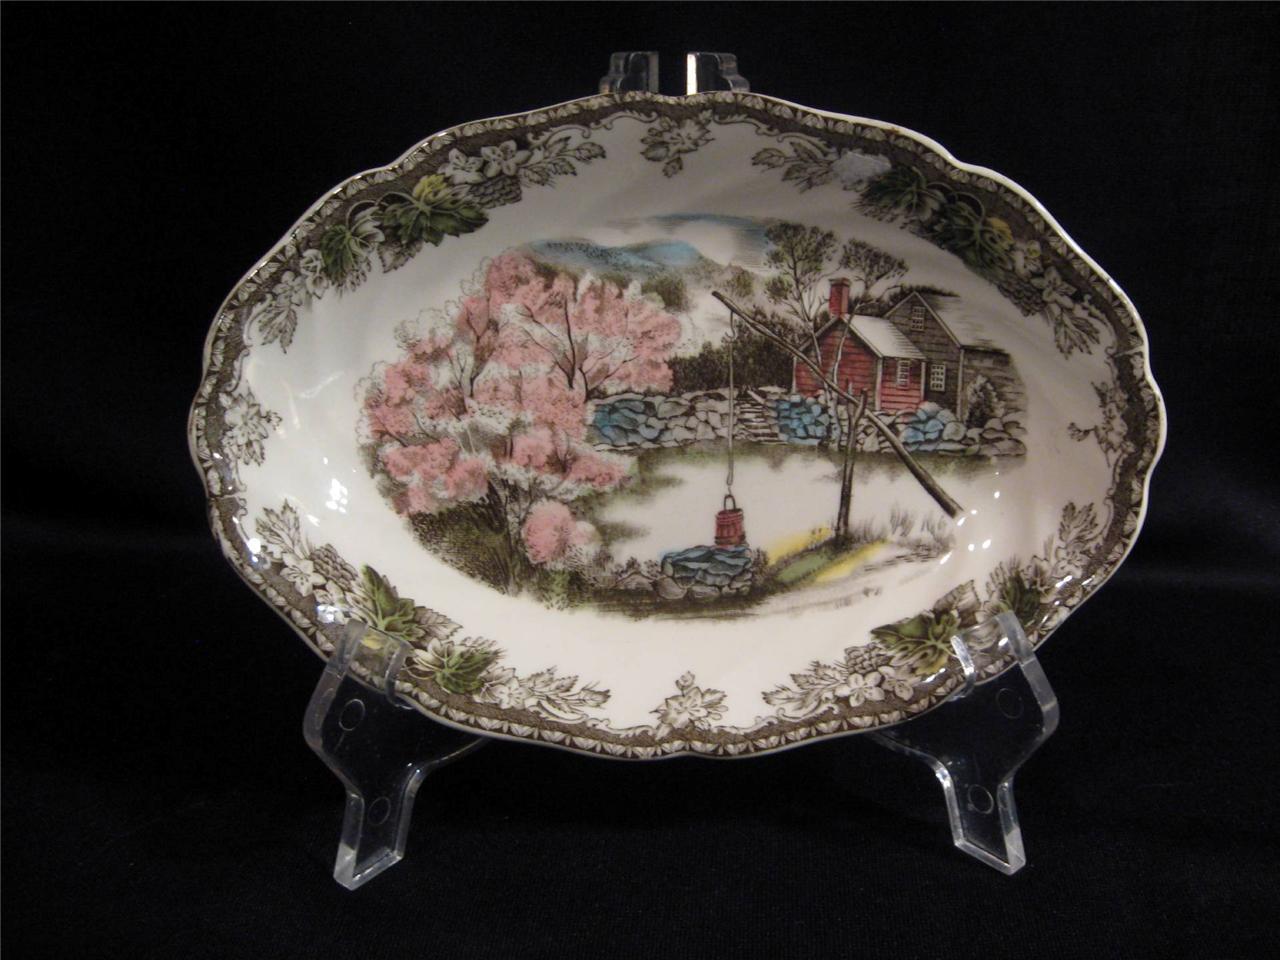 JOHNSON BROTHERS FRIENDLY VILLAGE RELISH PLATE / GRAVY UNDERPLATE - THE WELL - $30.91